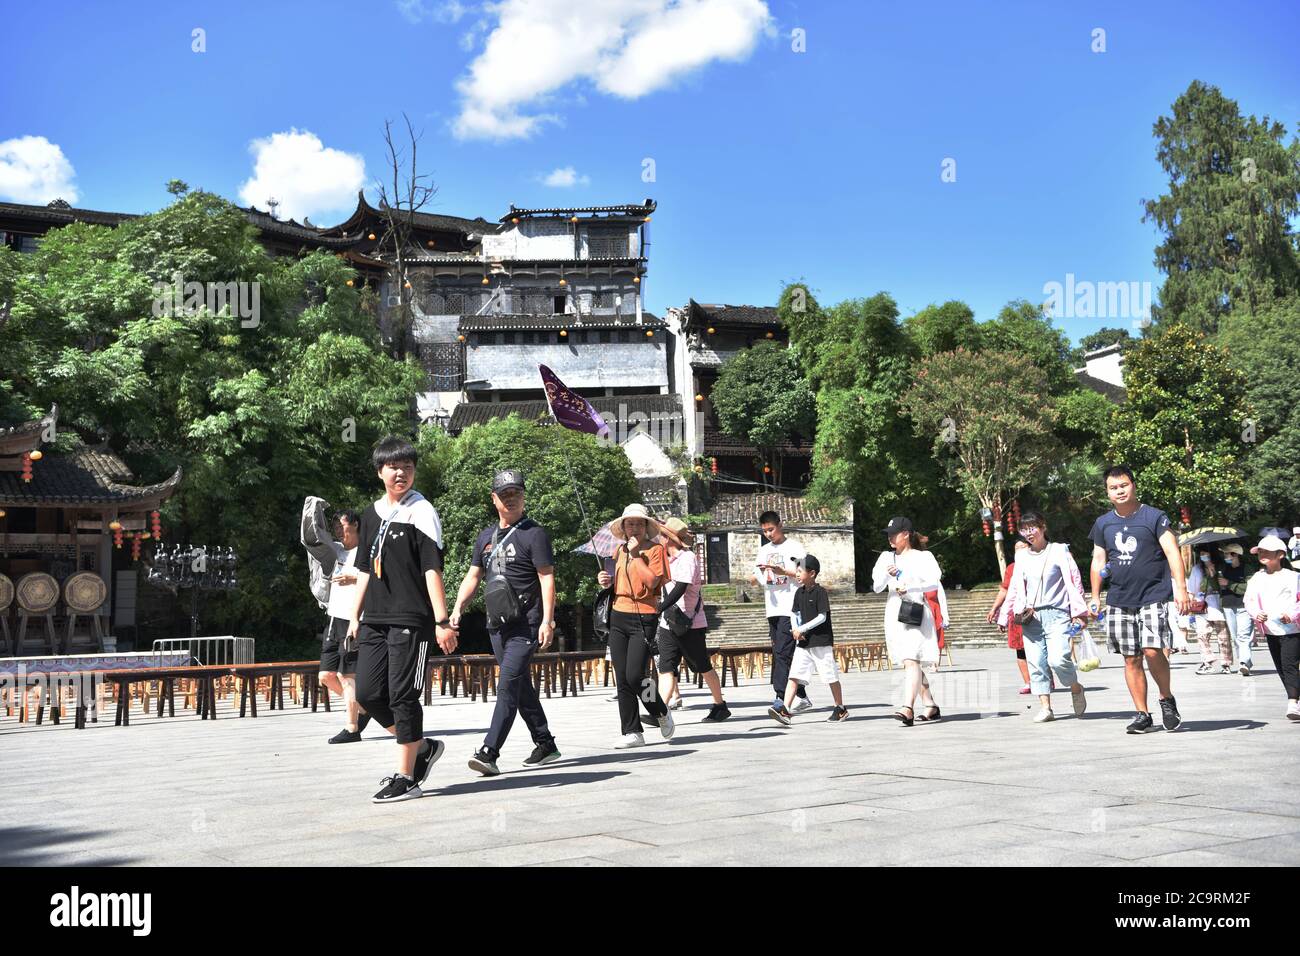 (200802) -- YONGSHUN, Aug. 2, 2020 (Xinhua) -- Tourists enjoy leisure time at the Furong Town scenic spot in Yongshun County, central China's Hunan Province, Aug. 2, 2020. With epidemic prevention measures in place, the scenic spot has seen an increase of tourists during the summer vacation, with an average of nearly 4000 visitors per day. (Xinhua/Chen Sihan) Stock Photo